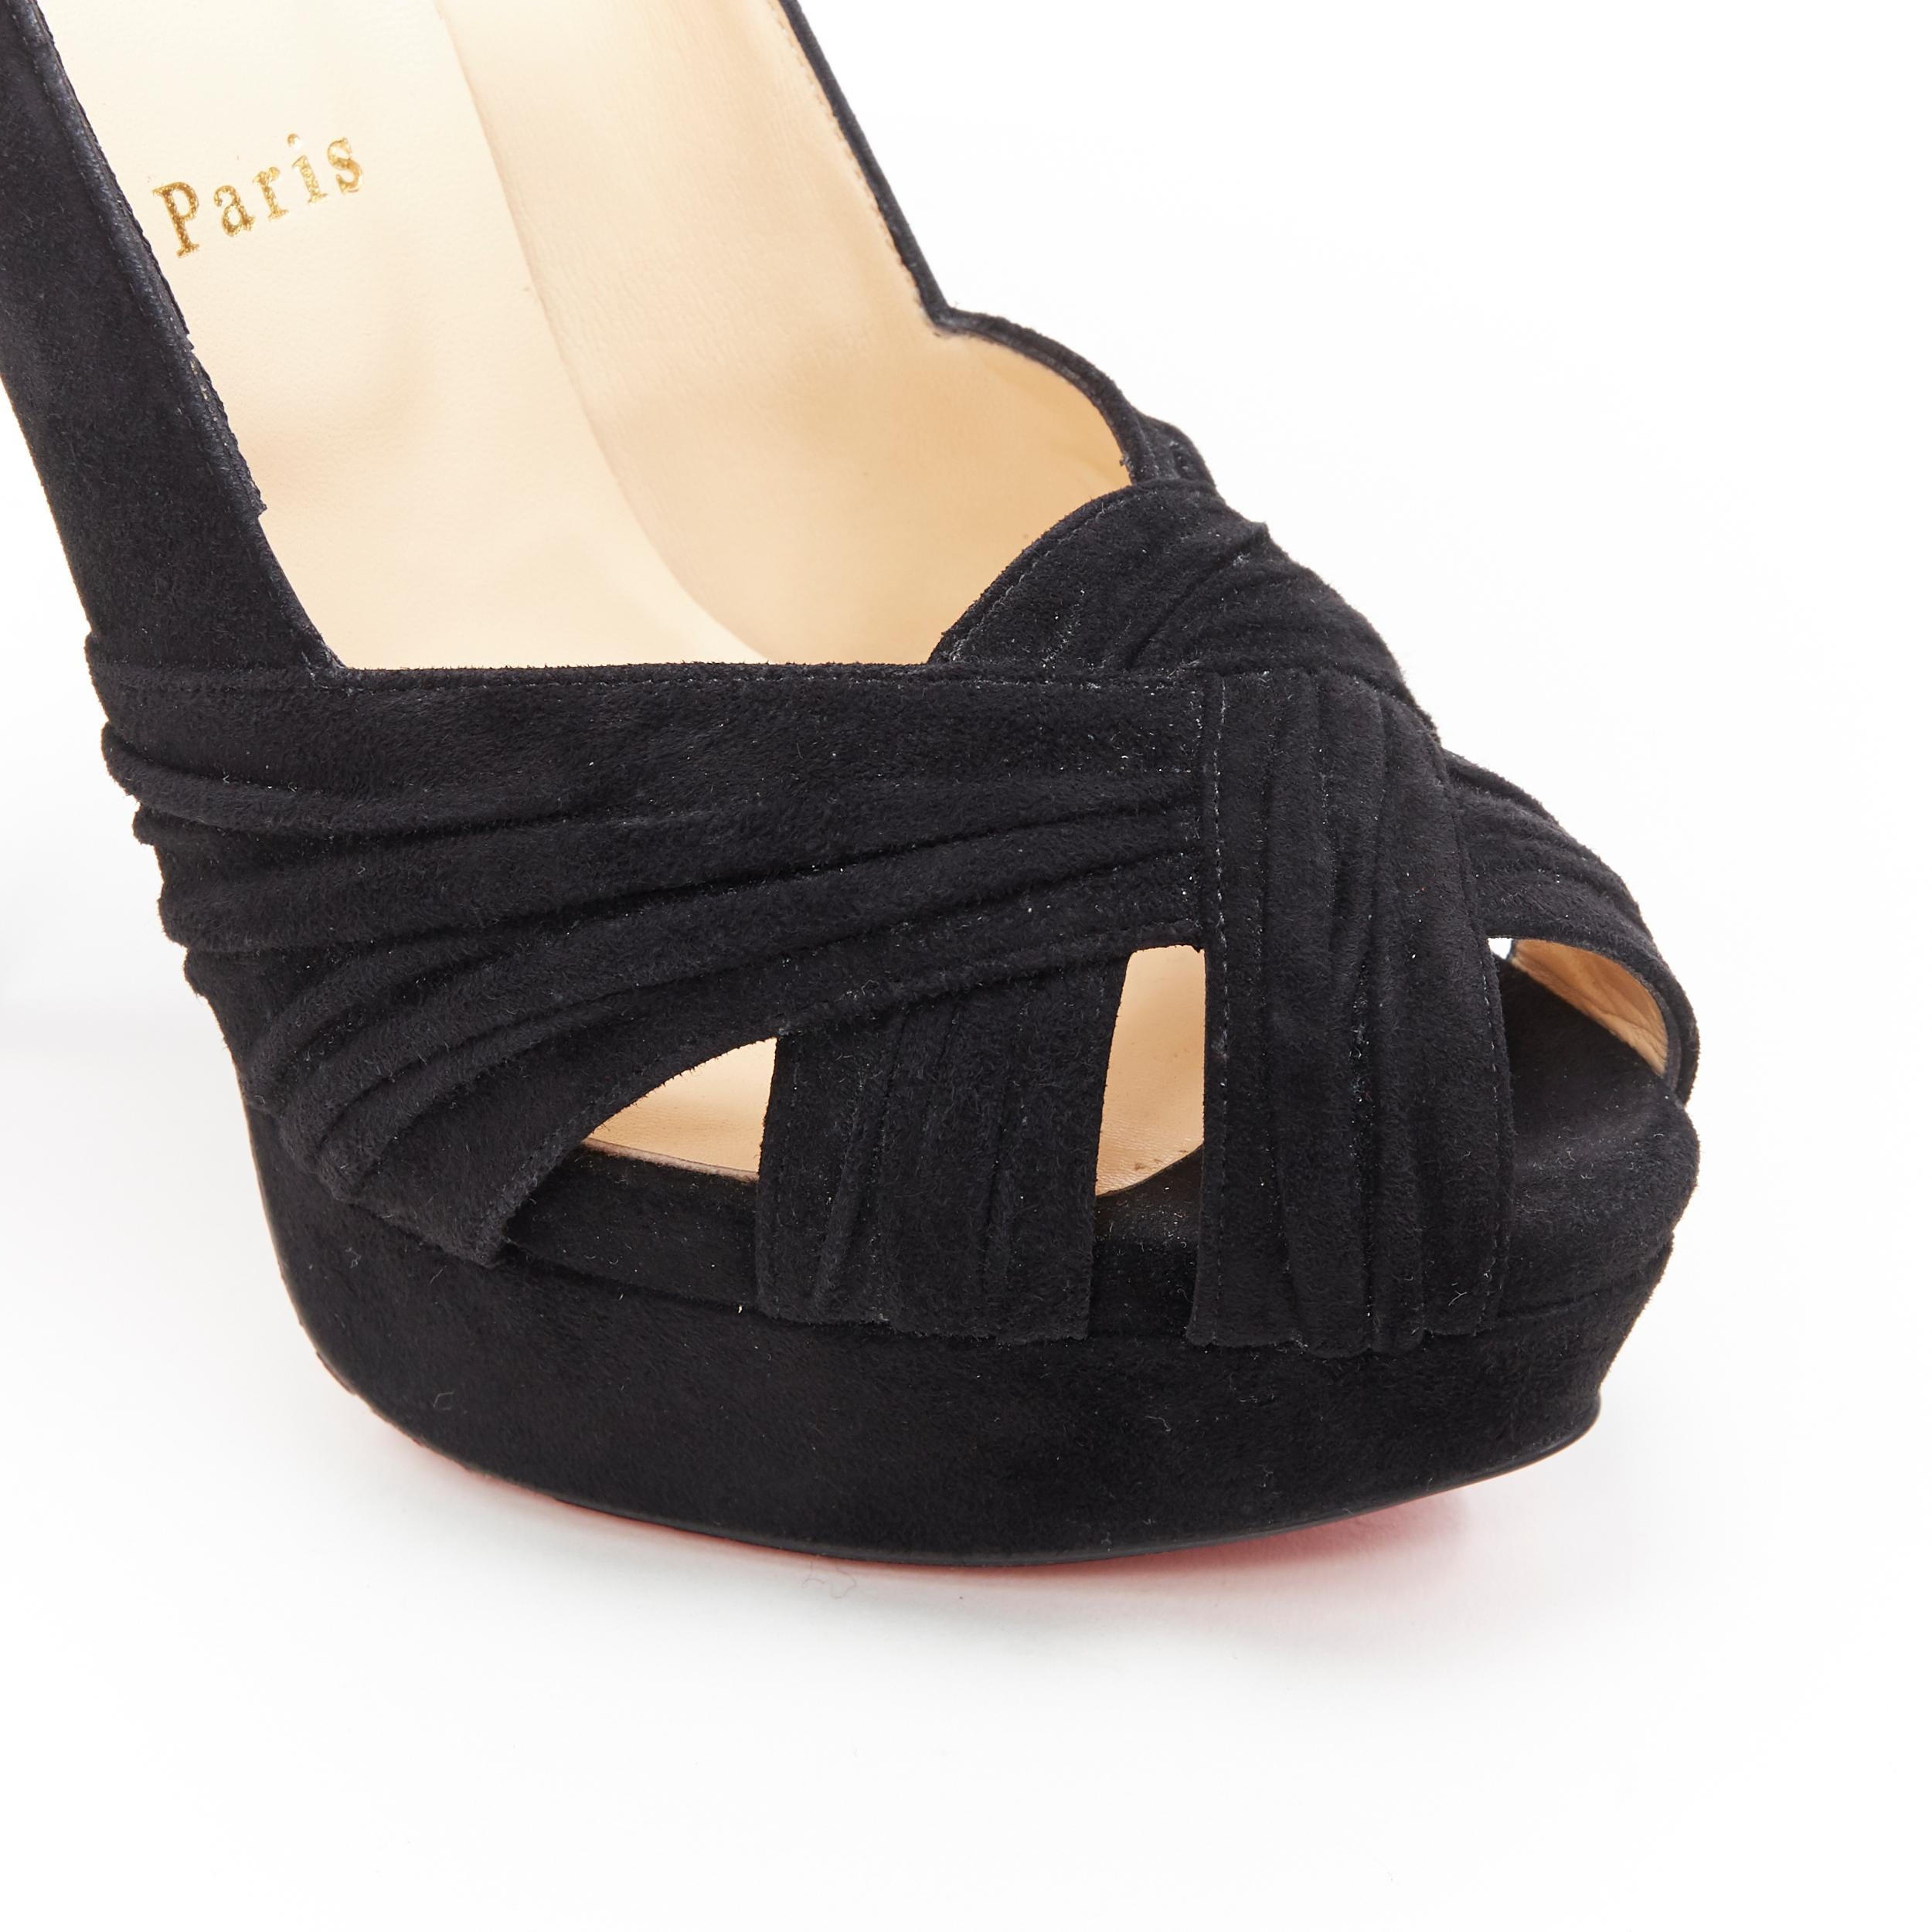 new CHRISTIAN LOUBOUTIN Aborina 150 black suede cross strap platform pump EU40
Brand: Christian Louboutin
Designer: Christian Louboutin
Model Name / Style: Aborina 150
Material: Suede
Color: Black
Pattern: Solid
Lining material: Leather
Extra